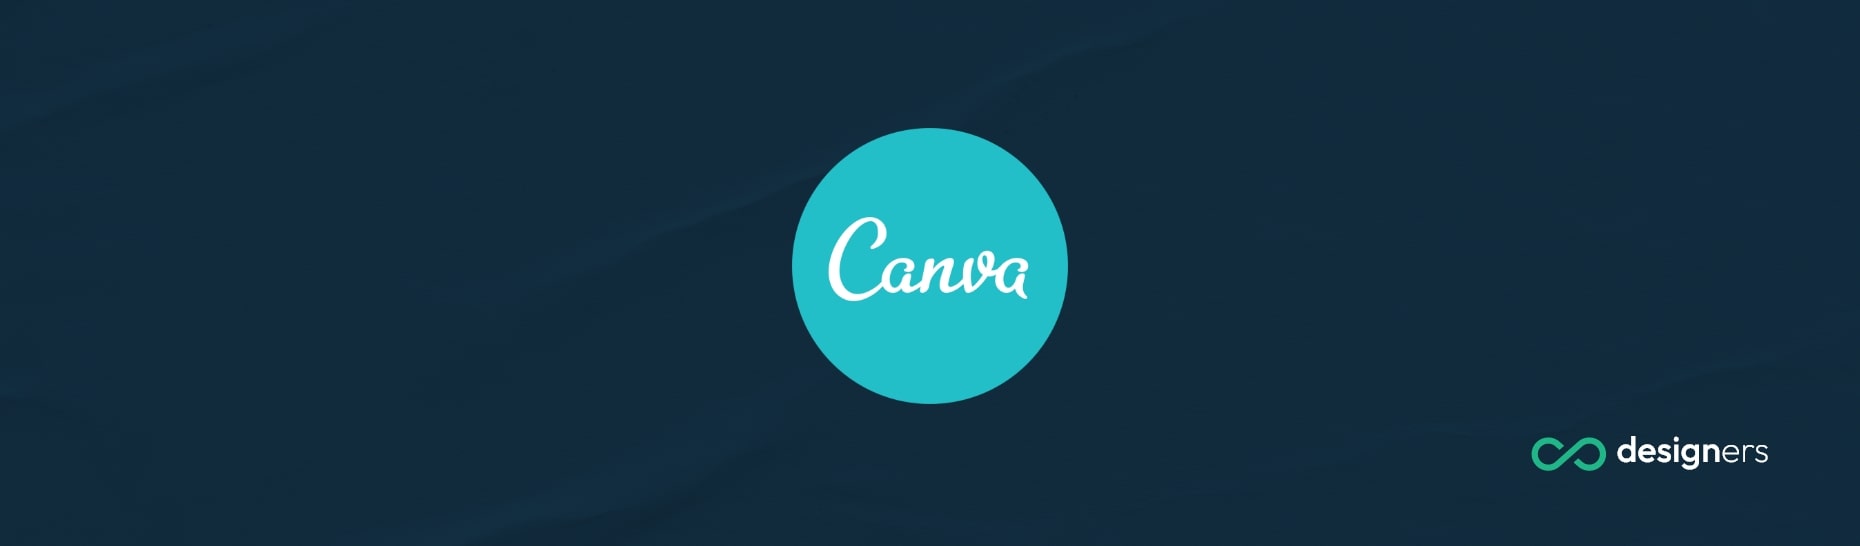 Is Canva Good for Marketing?